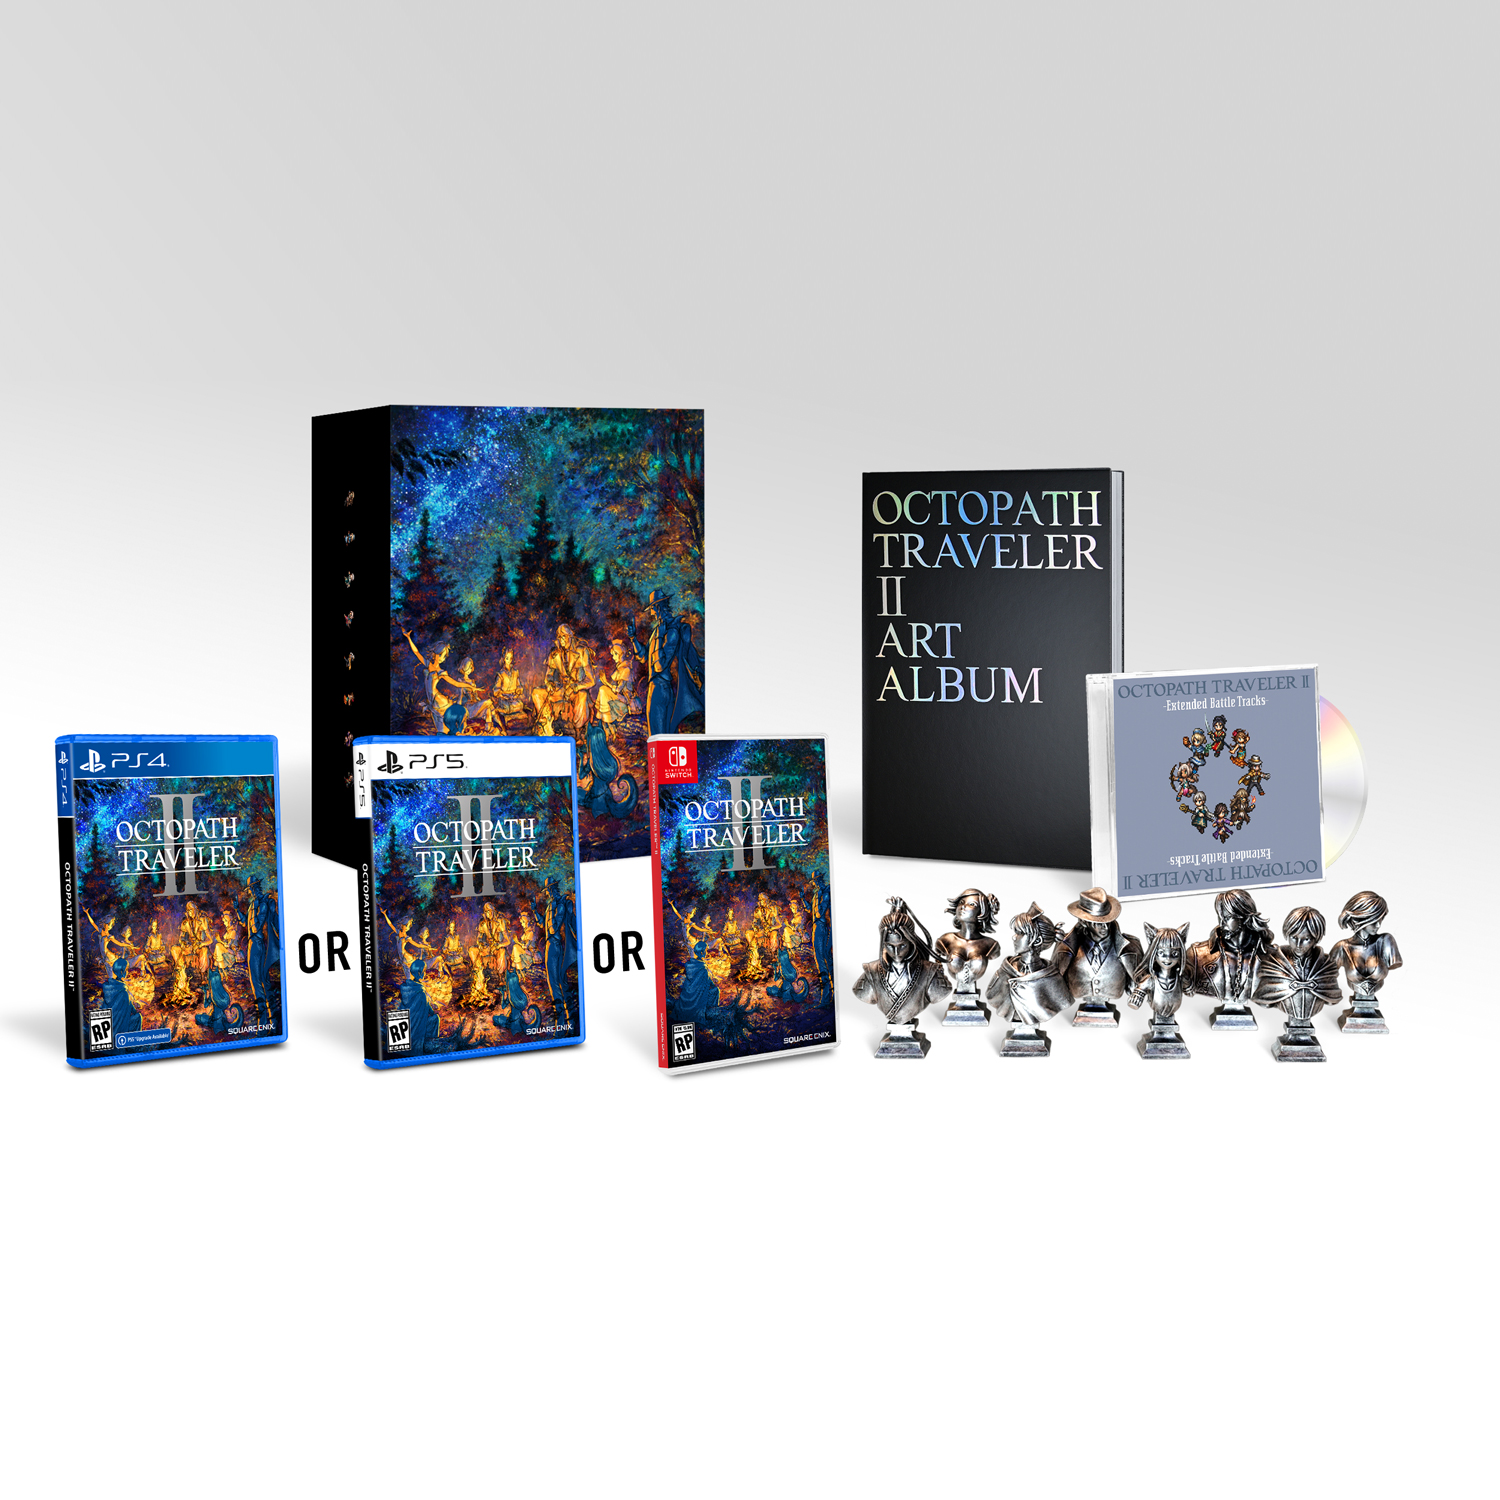 princip forfølgelse jug Square Enix Merchandise (North America) on Twitter: "Happy Launch Day to  #OctopathTraveler2! Make sure to pick up your copy of the Collector's  Edition Set exclusively from the SQUARE ENIX STORE today!!  https://t.co/IEwpRBJA9l